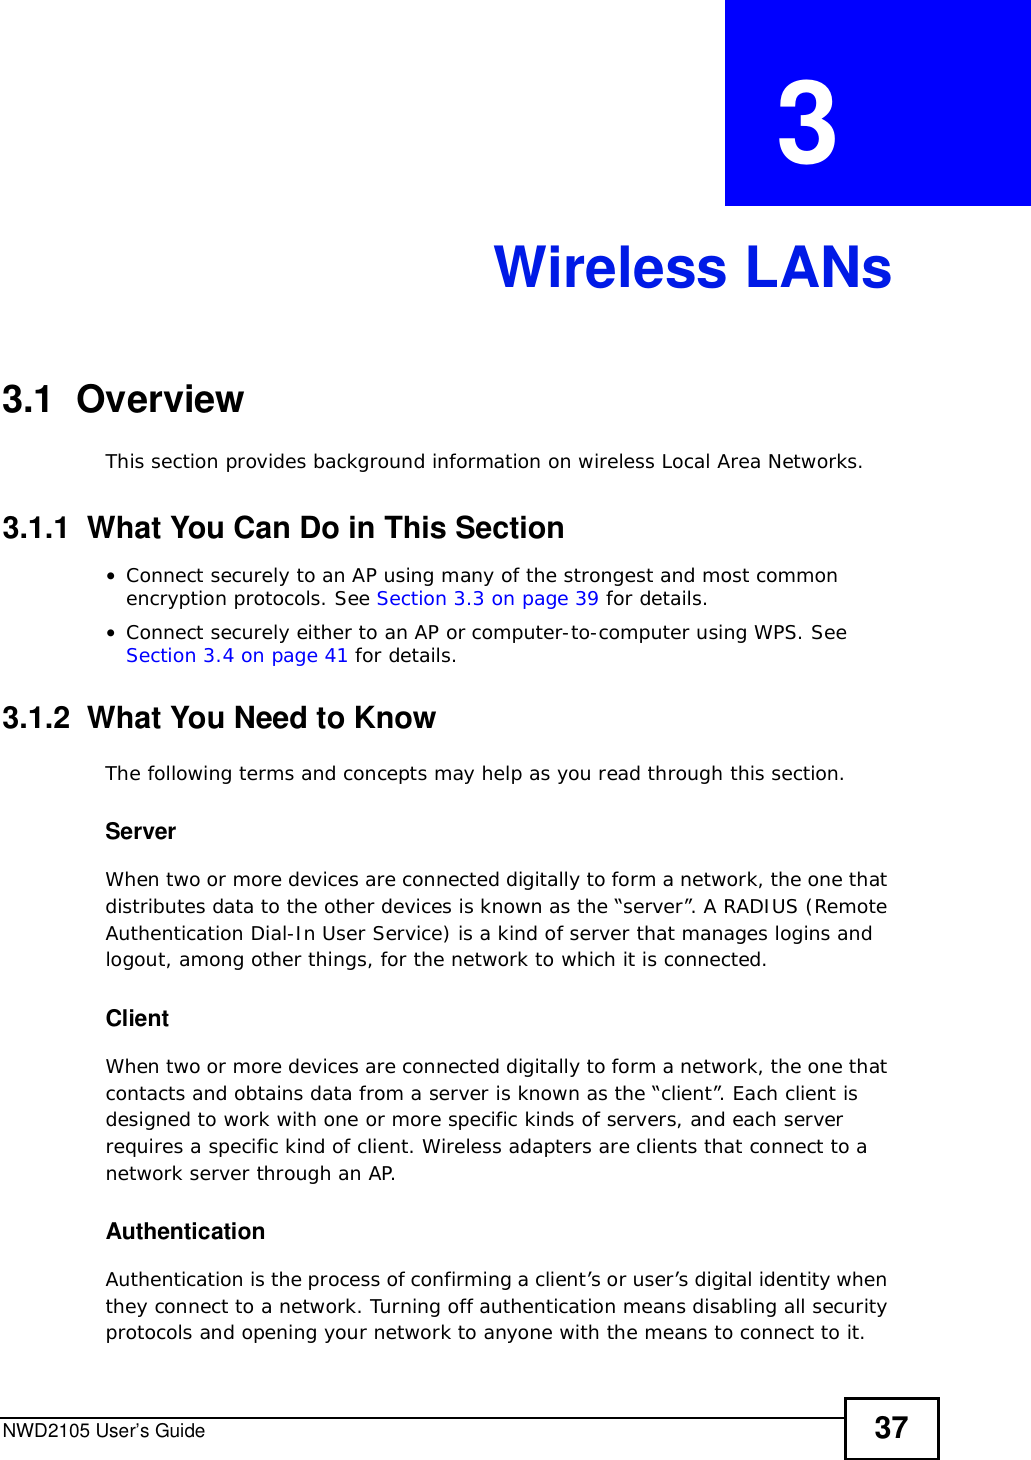 NWD2105 User’s Guide 37CHAPTER  3 Wireless LANs3.1  OverviewThis section provides background information on wireless Local Area Networks.3.1.1  What You Can Do in This Section•Connect securely to an AP using many of the strongest and most common encryption protocols. See Section 3.3 on page 39 for details.•Connect securely either to an AP or computer-to-computer using WPS. See Section 3.4 on page 41 for details.3.1.2  What You Need to KnowThe following terms and concepts may help as you read through this section.ServerWhen two or more devices are connected digitally to form a network, the one that distributes data to the other devices is known as the “server”. A RADIUS (Remote Authentication Dial-In User Service) is a kind of server that manages logins and logout, among other things, for the network to which it is connected.ClientWhen two or more devices are connected digitally to form a network, the one that contacts and obtains data from a server is known as the “client”. Each client is designed to work with one or more specific kinds of servers, and each server requires a specific kind of client. Wireless adapters are clients that connect to a network server through an AP.AuthenticationAuthentication is the process of confirming a client’s or user’s digital identity when they connect to a network. Turning off authentication means disabling all security protocols and opening your network to anyone with the means to connect to it.